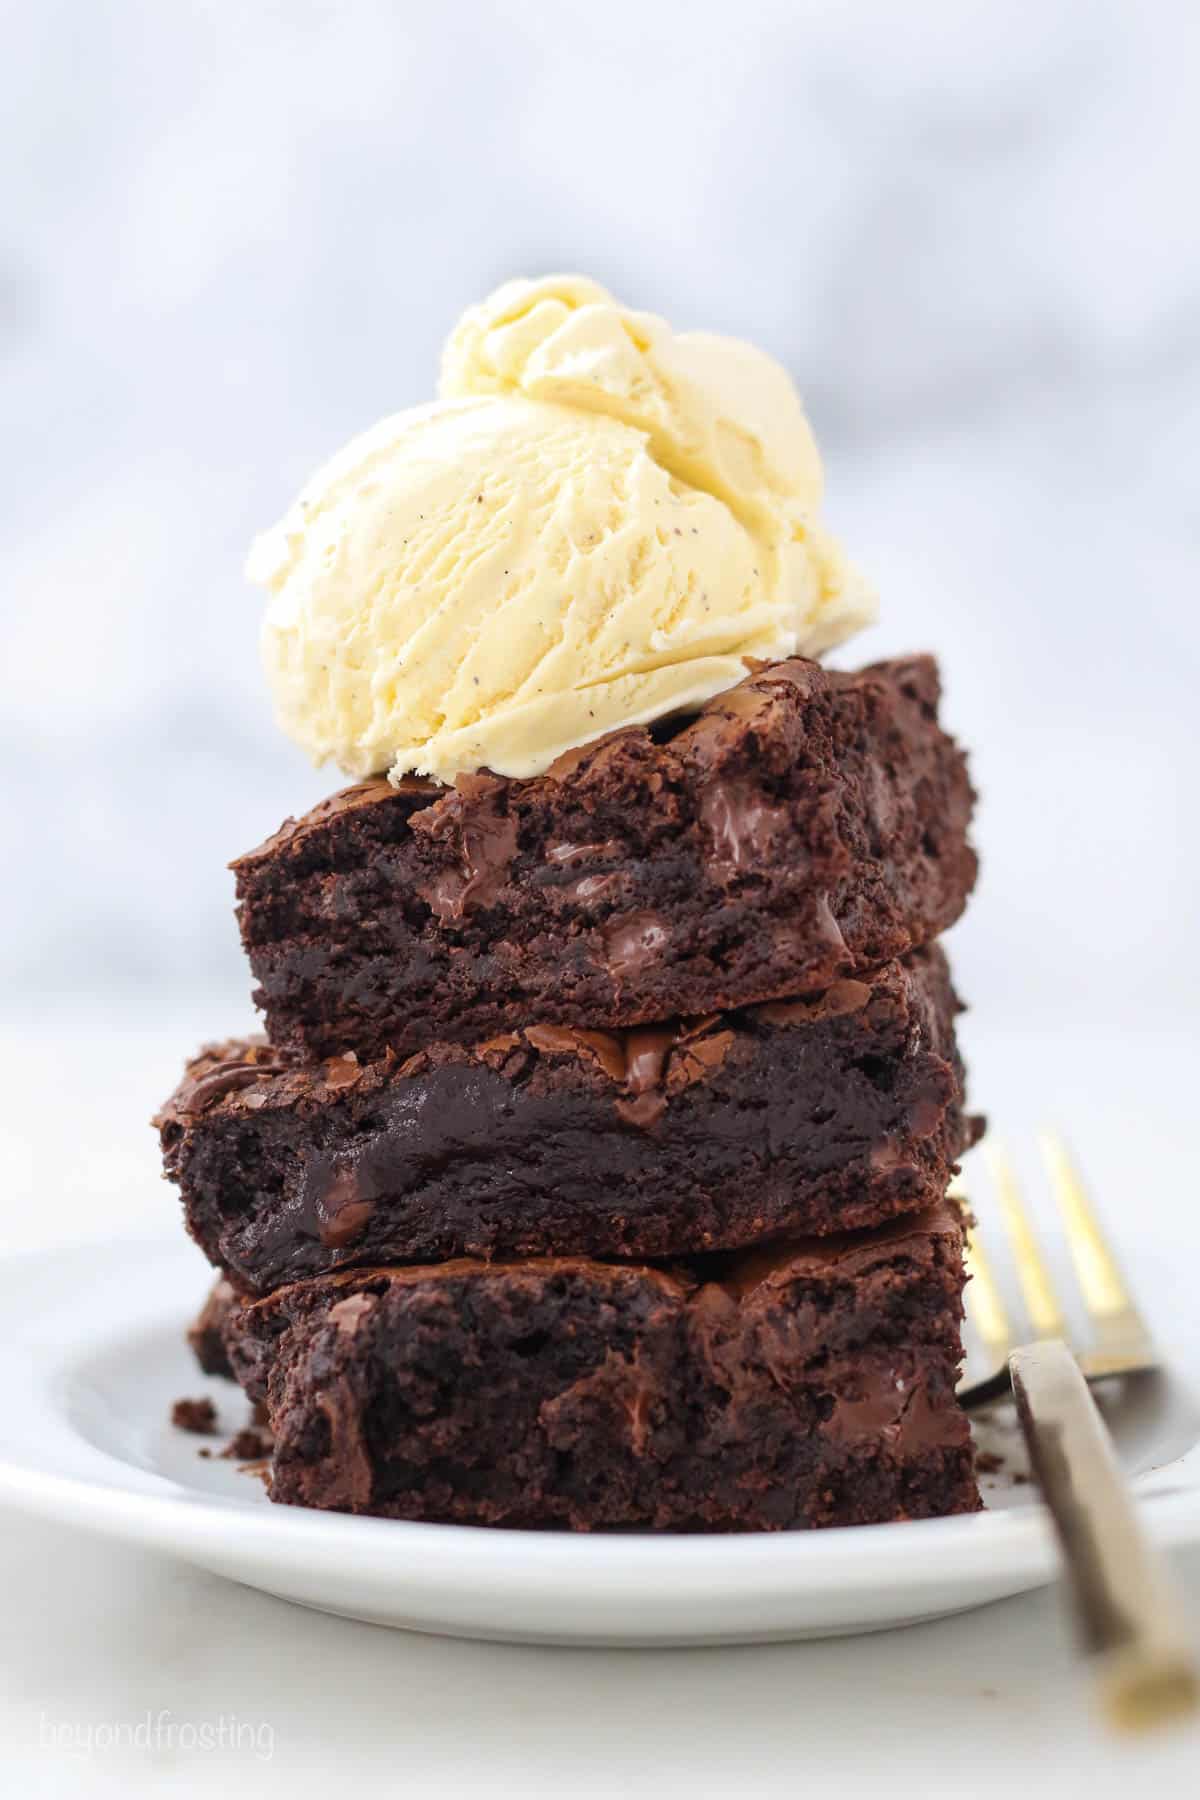 Three brownies on a white plate with a big scoop of vanilla ice cream on top and gold fork laying on the plate